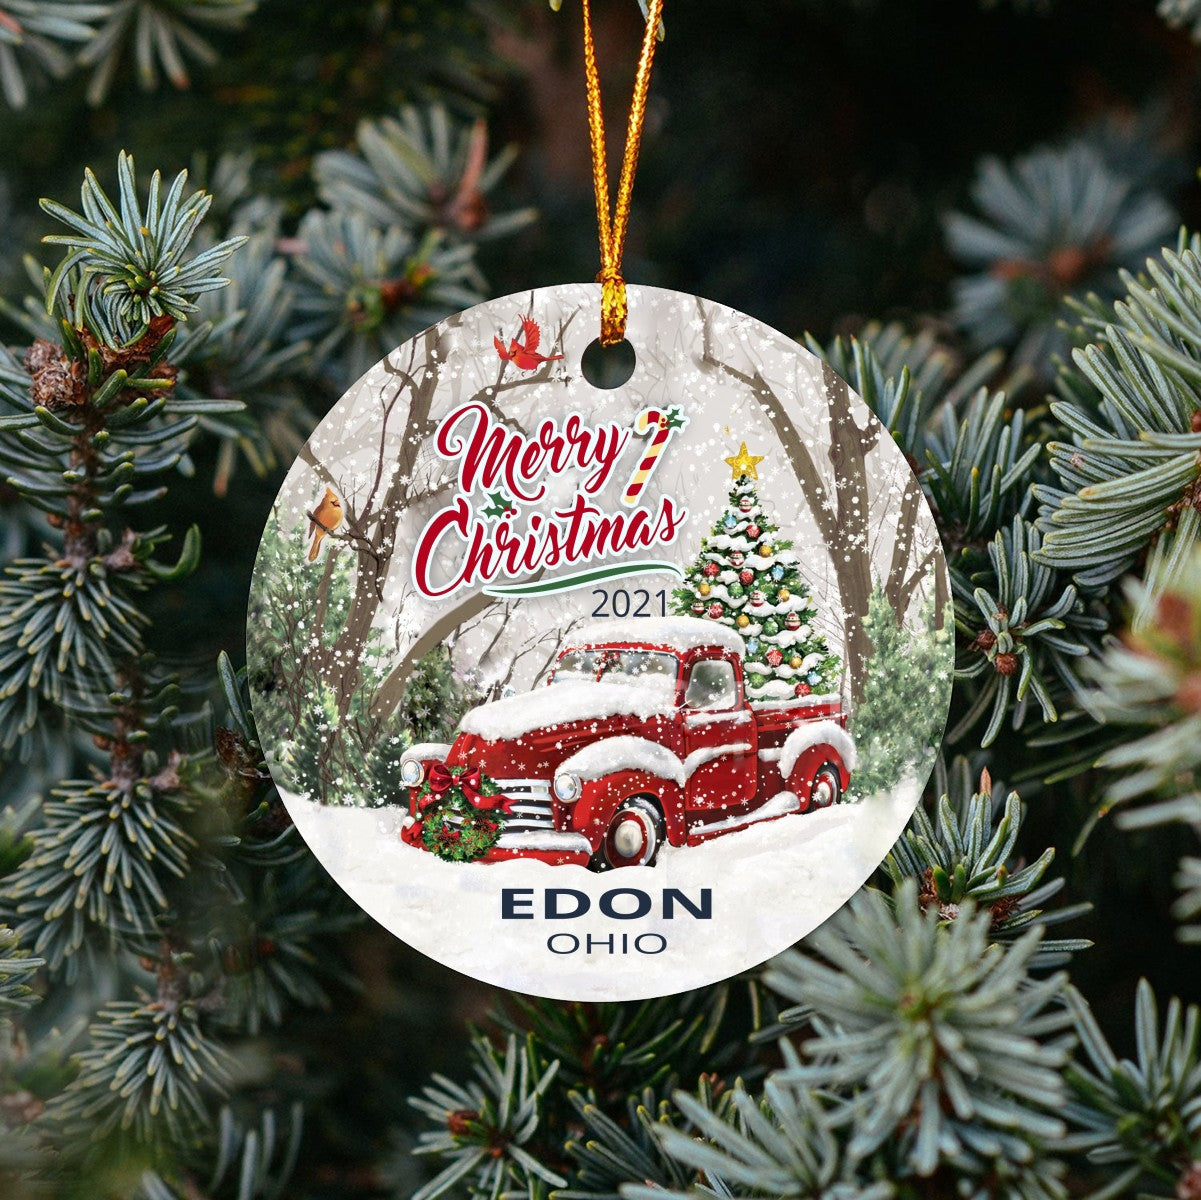 Christmas Tree Ornaments Edon - Ornament With Name City, State Edon Ohio OH Ornament - Red Truck Xmas Ornaments 3'' Plastic Gift For Family, Friend And Housewarming